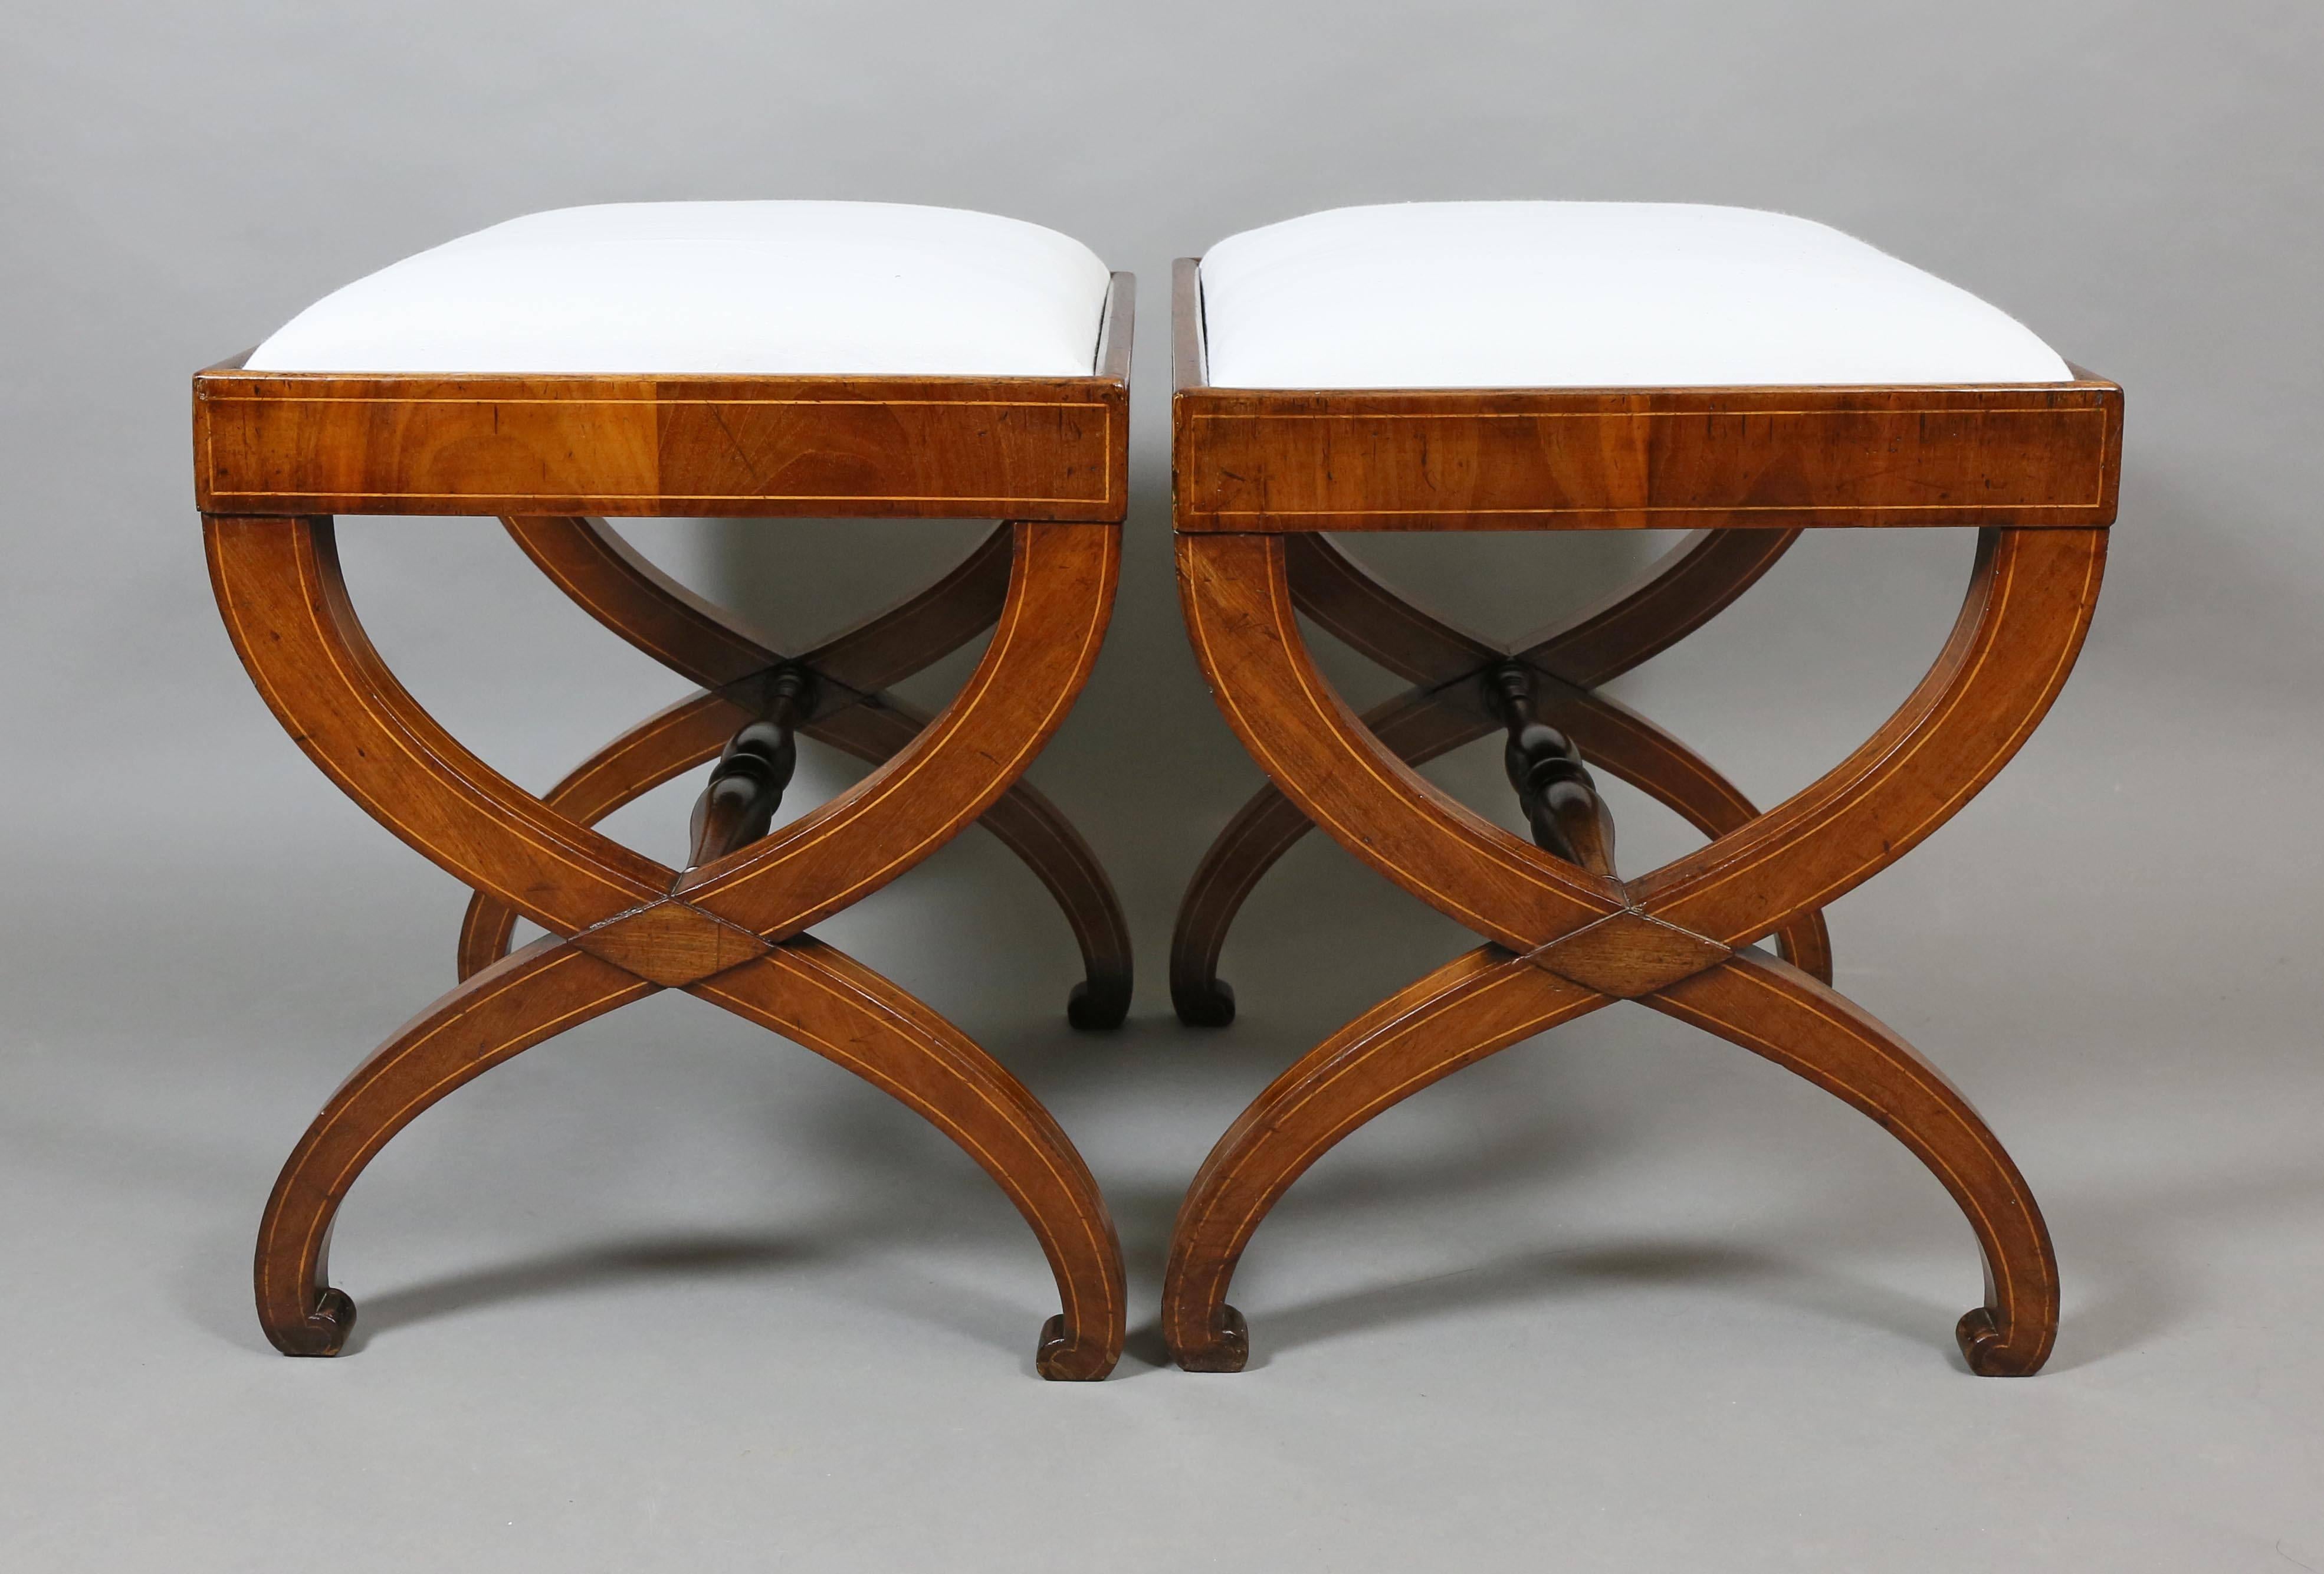 French Pair of Empire Mahogany and Inlaid Benches